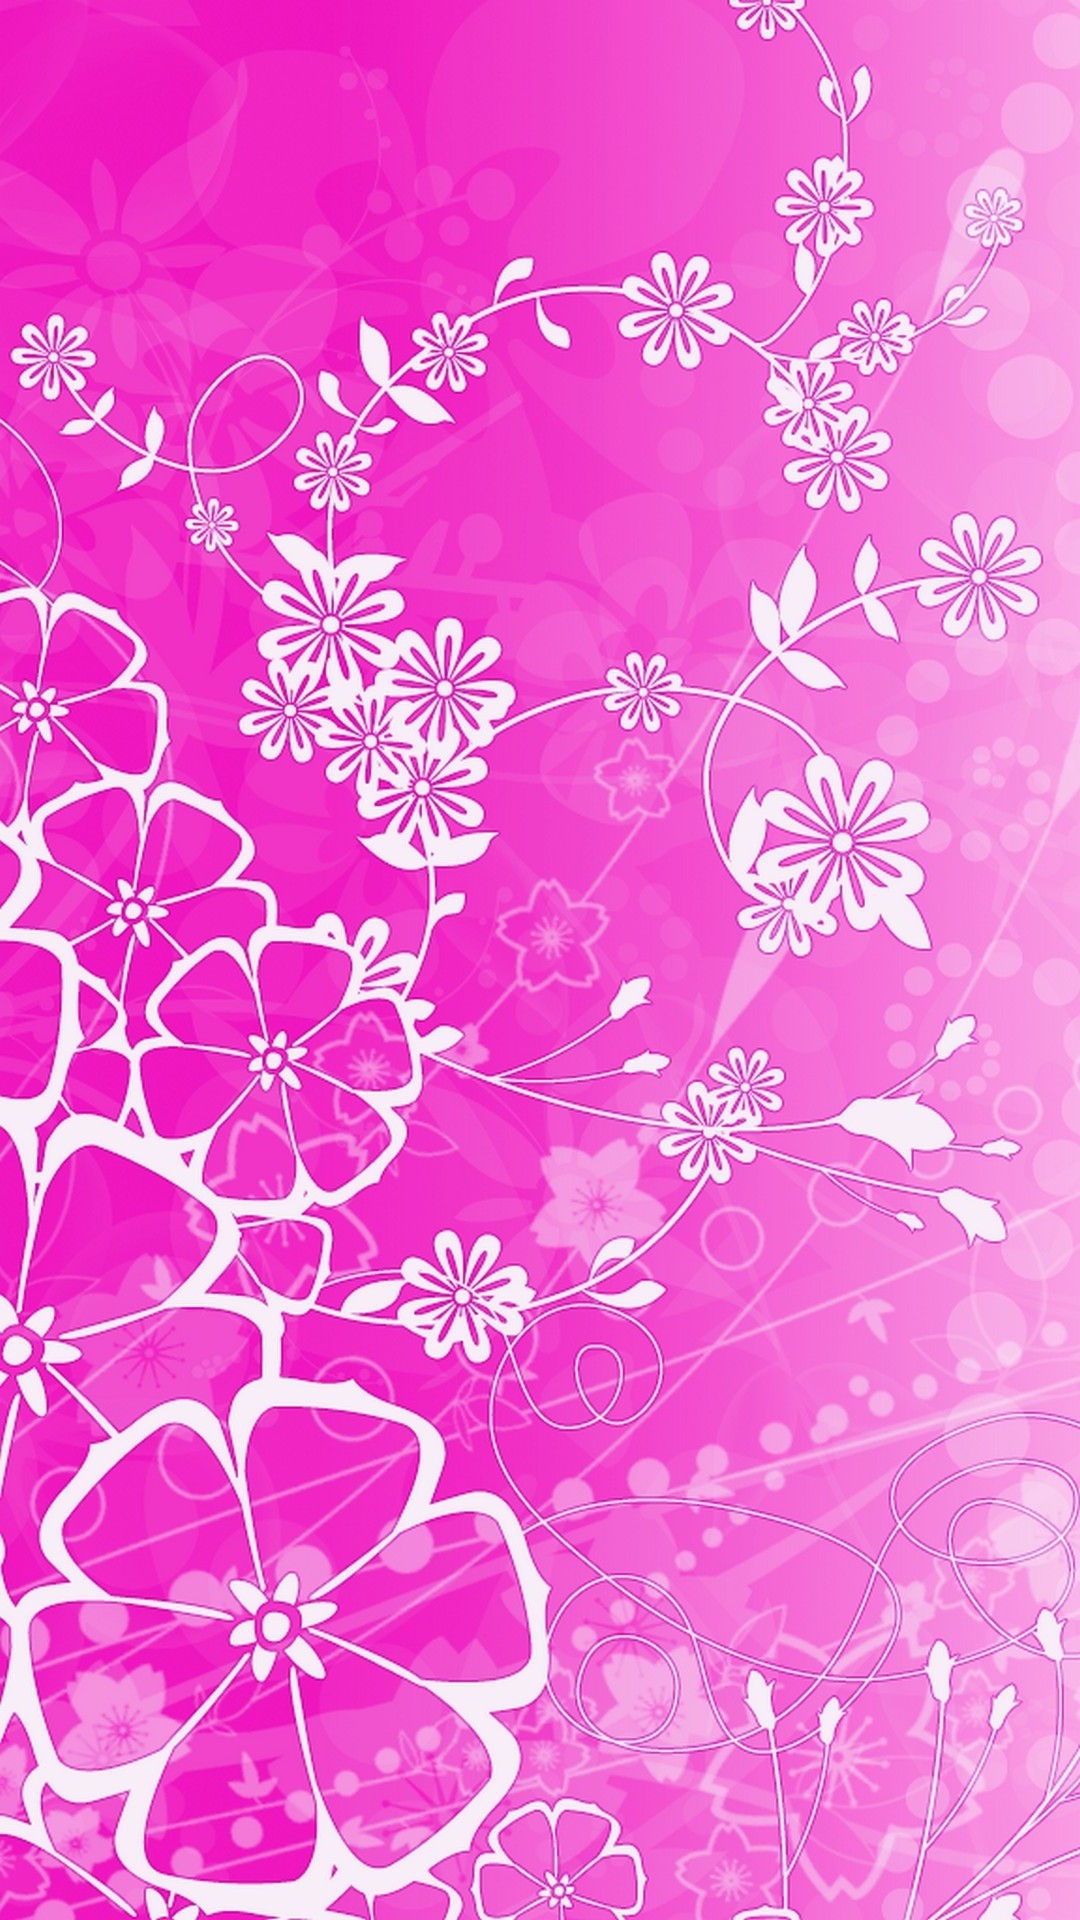 Animated Android Wallpaper Flower with HD resolution 1080x1920